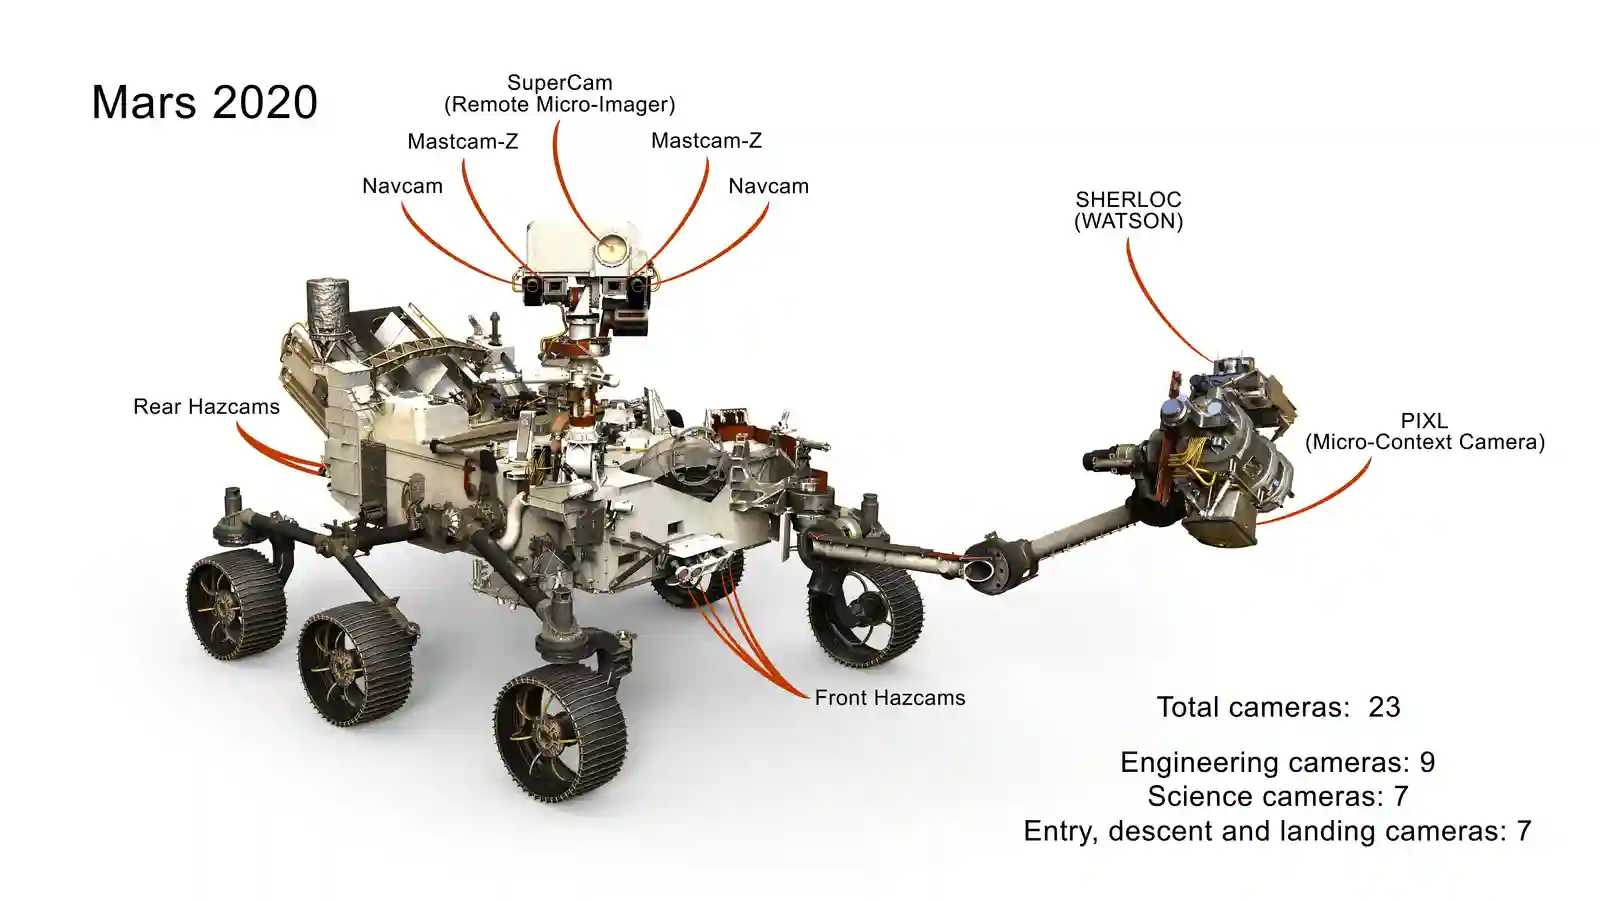 cameras installed on perseverance rover